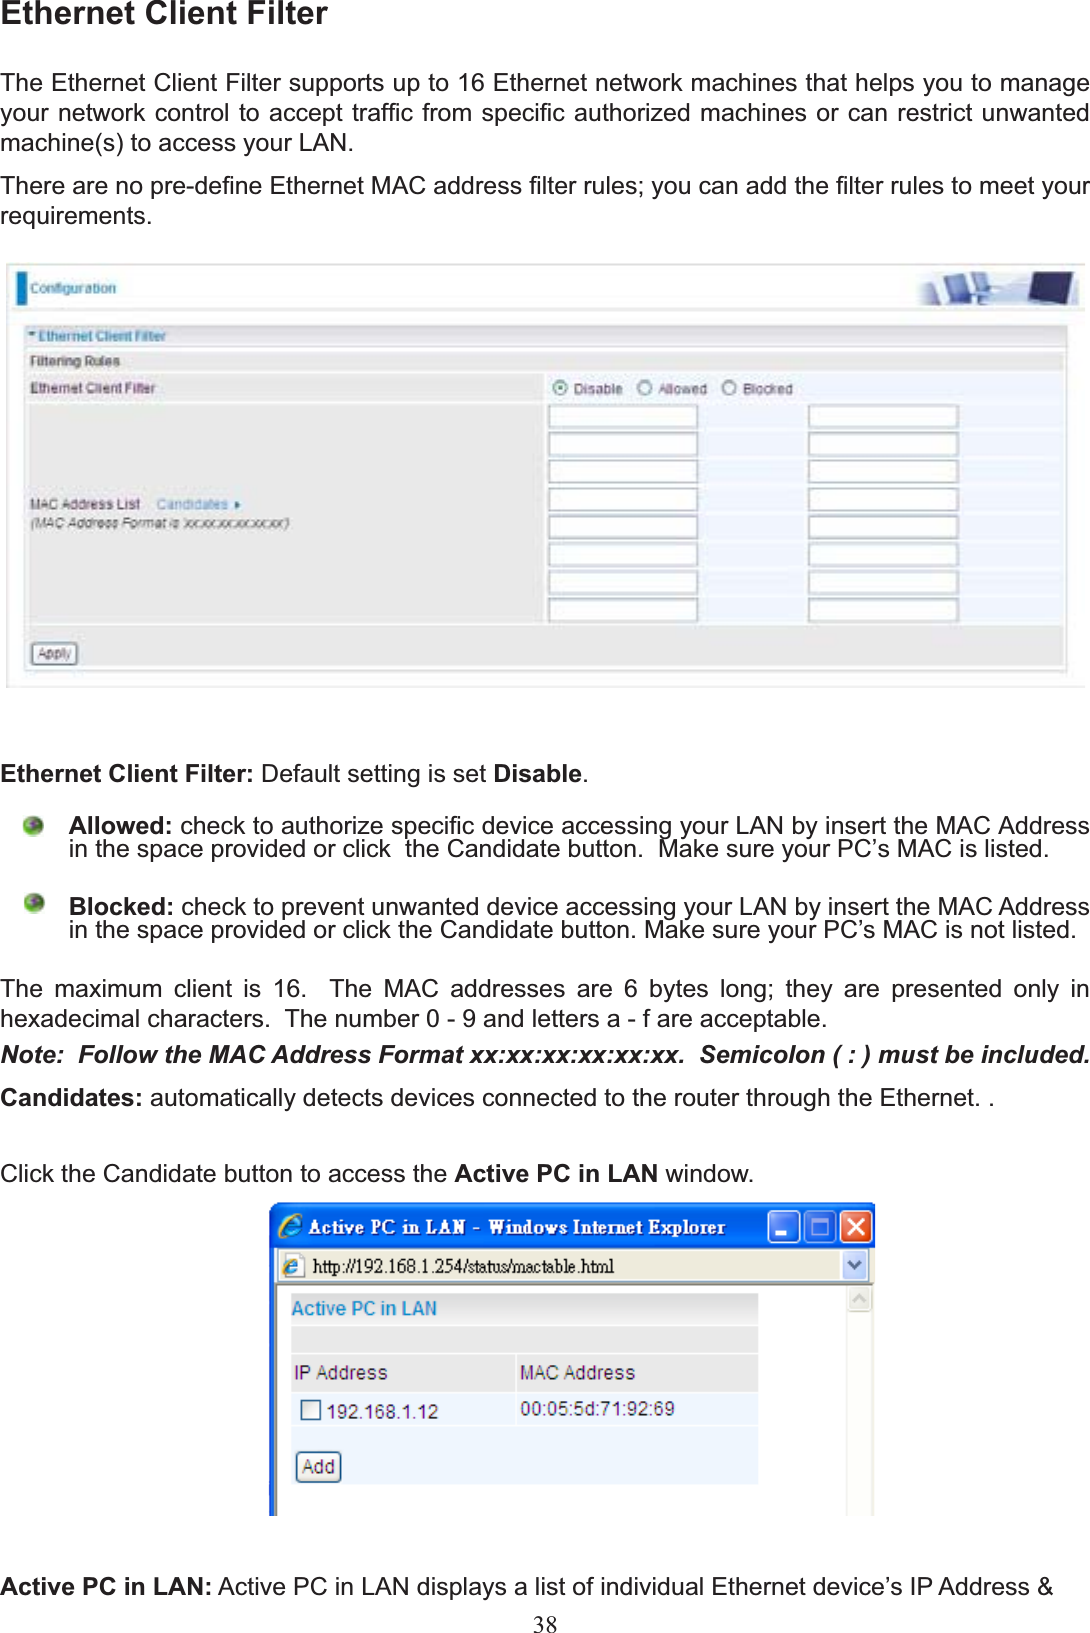 Ethernet Client FilterThe Ethernet Client Filter supports up to 16 Ethernet network machines that helps you to manage \RXUQHWZRUNFRQWUROWRDFFHSWWUDI¿FIURPVSHFL¿FDXWKRUL]HGPDFKLQHVRUFDQUHVWULFWXQZDQWHGmachine(s) to access your LAN. 7KHUHDUHQRSUHGH¿QH(WKHUQHW0$&amp;DGGUHVV¿OWHUUXOHV\RXFDQDGGWKH¿OWHUUXOHVWRPHHW\RXUUHTXLUHPHQWVEthernet Client Filter: Default setting is set Disable.Allowed: FKHFNWRDXWKRUL]HVSHFL¿FGHYLFHDFFHVVLQJ\RXU/$1E\LQVHUWWKH0$&amp;$GGUHVVLQWKHVSDFHSURYLGHGRUFOLFNWKH&amp;DQGLGDWHEXWWRQ0DNHVXUH\RXU3&amp;¶V0$&amp;LVOLVWHGBlocked: FKHFNWRSUHYHQWXQZDQWHGGHYLFHDFFHVVLQJ\RXU/$1E\LQVHUWWKH0$&amp;$GGUHVVLQWKHVSDFHSURYLGHGRUFOLFNWKH&amp;DQGLGDWHEXWWRQ0DNHVXUH\RXU3&amp;¶V0$&amp;LVQRWOLVWHG7KH PD[LPXP FOLHQW LV   7KH 0$&amp; DGGUHVVHV DUH  E\WHV ORQJ WKH\ DUH SUHVHQWHG RQO\ LQhexadecimal characters.  The number 0 - 9 and letters a - f are acceptable. Note:  Follow the MAC Address Format xx:xx:xx:xx:xx:xx.  Semicolon ( : ) must be included.Candidates: automatically detects devices connected to the router through the Ethernet. . Click the Candidate button to access the Active PC in LAN window.Active PC in LAN: $FWLYH3&amp;LQ/$1GLVSOD\VDOLVWRILQGLYLGXDO(WKHUQHWGHYLFH¶V,3$GGUHVV38